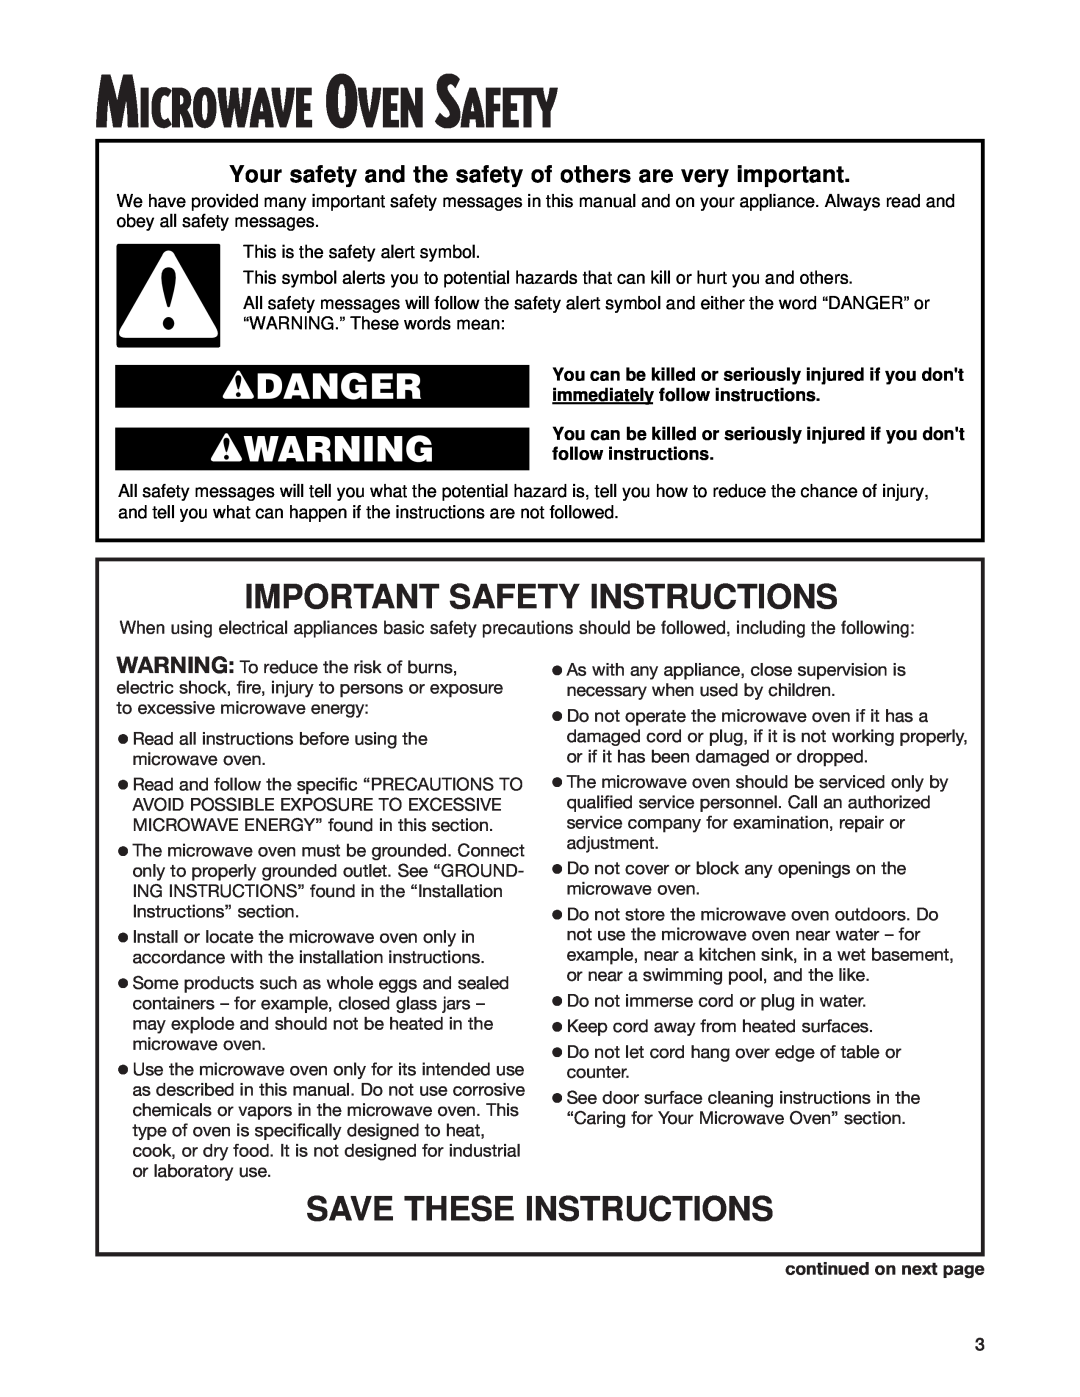 Whirlpool MT4110SK Microwave Oven Safety, wDANGER wWARNING, Important Safety Instructions, Save These Instructions 